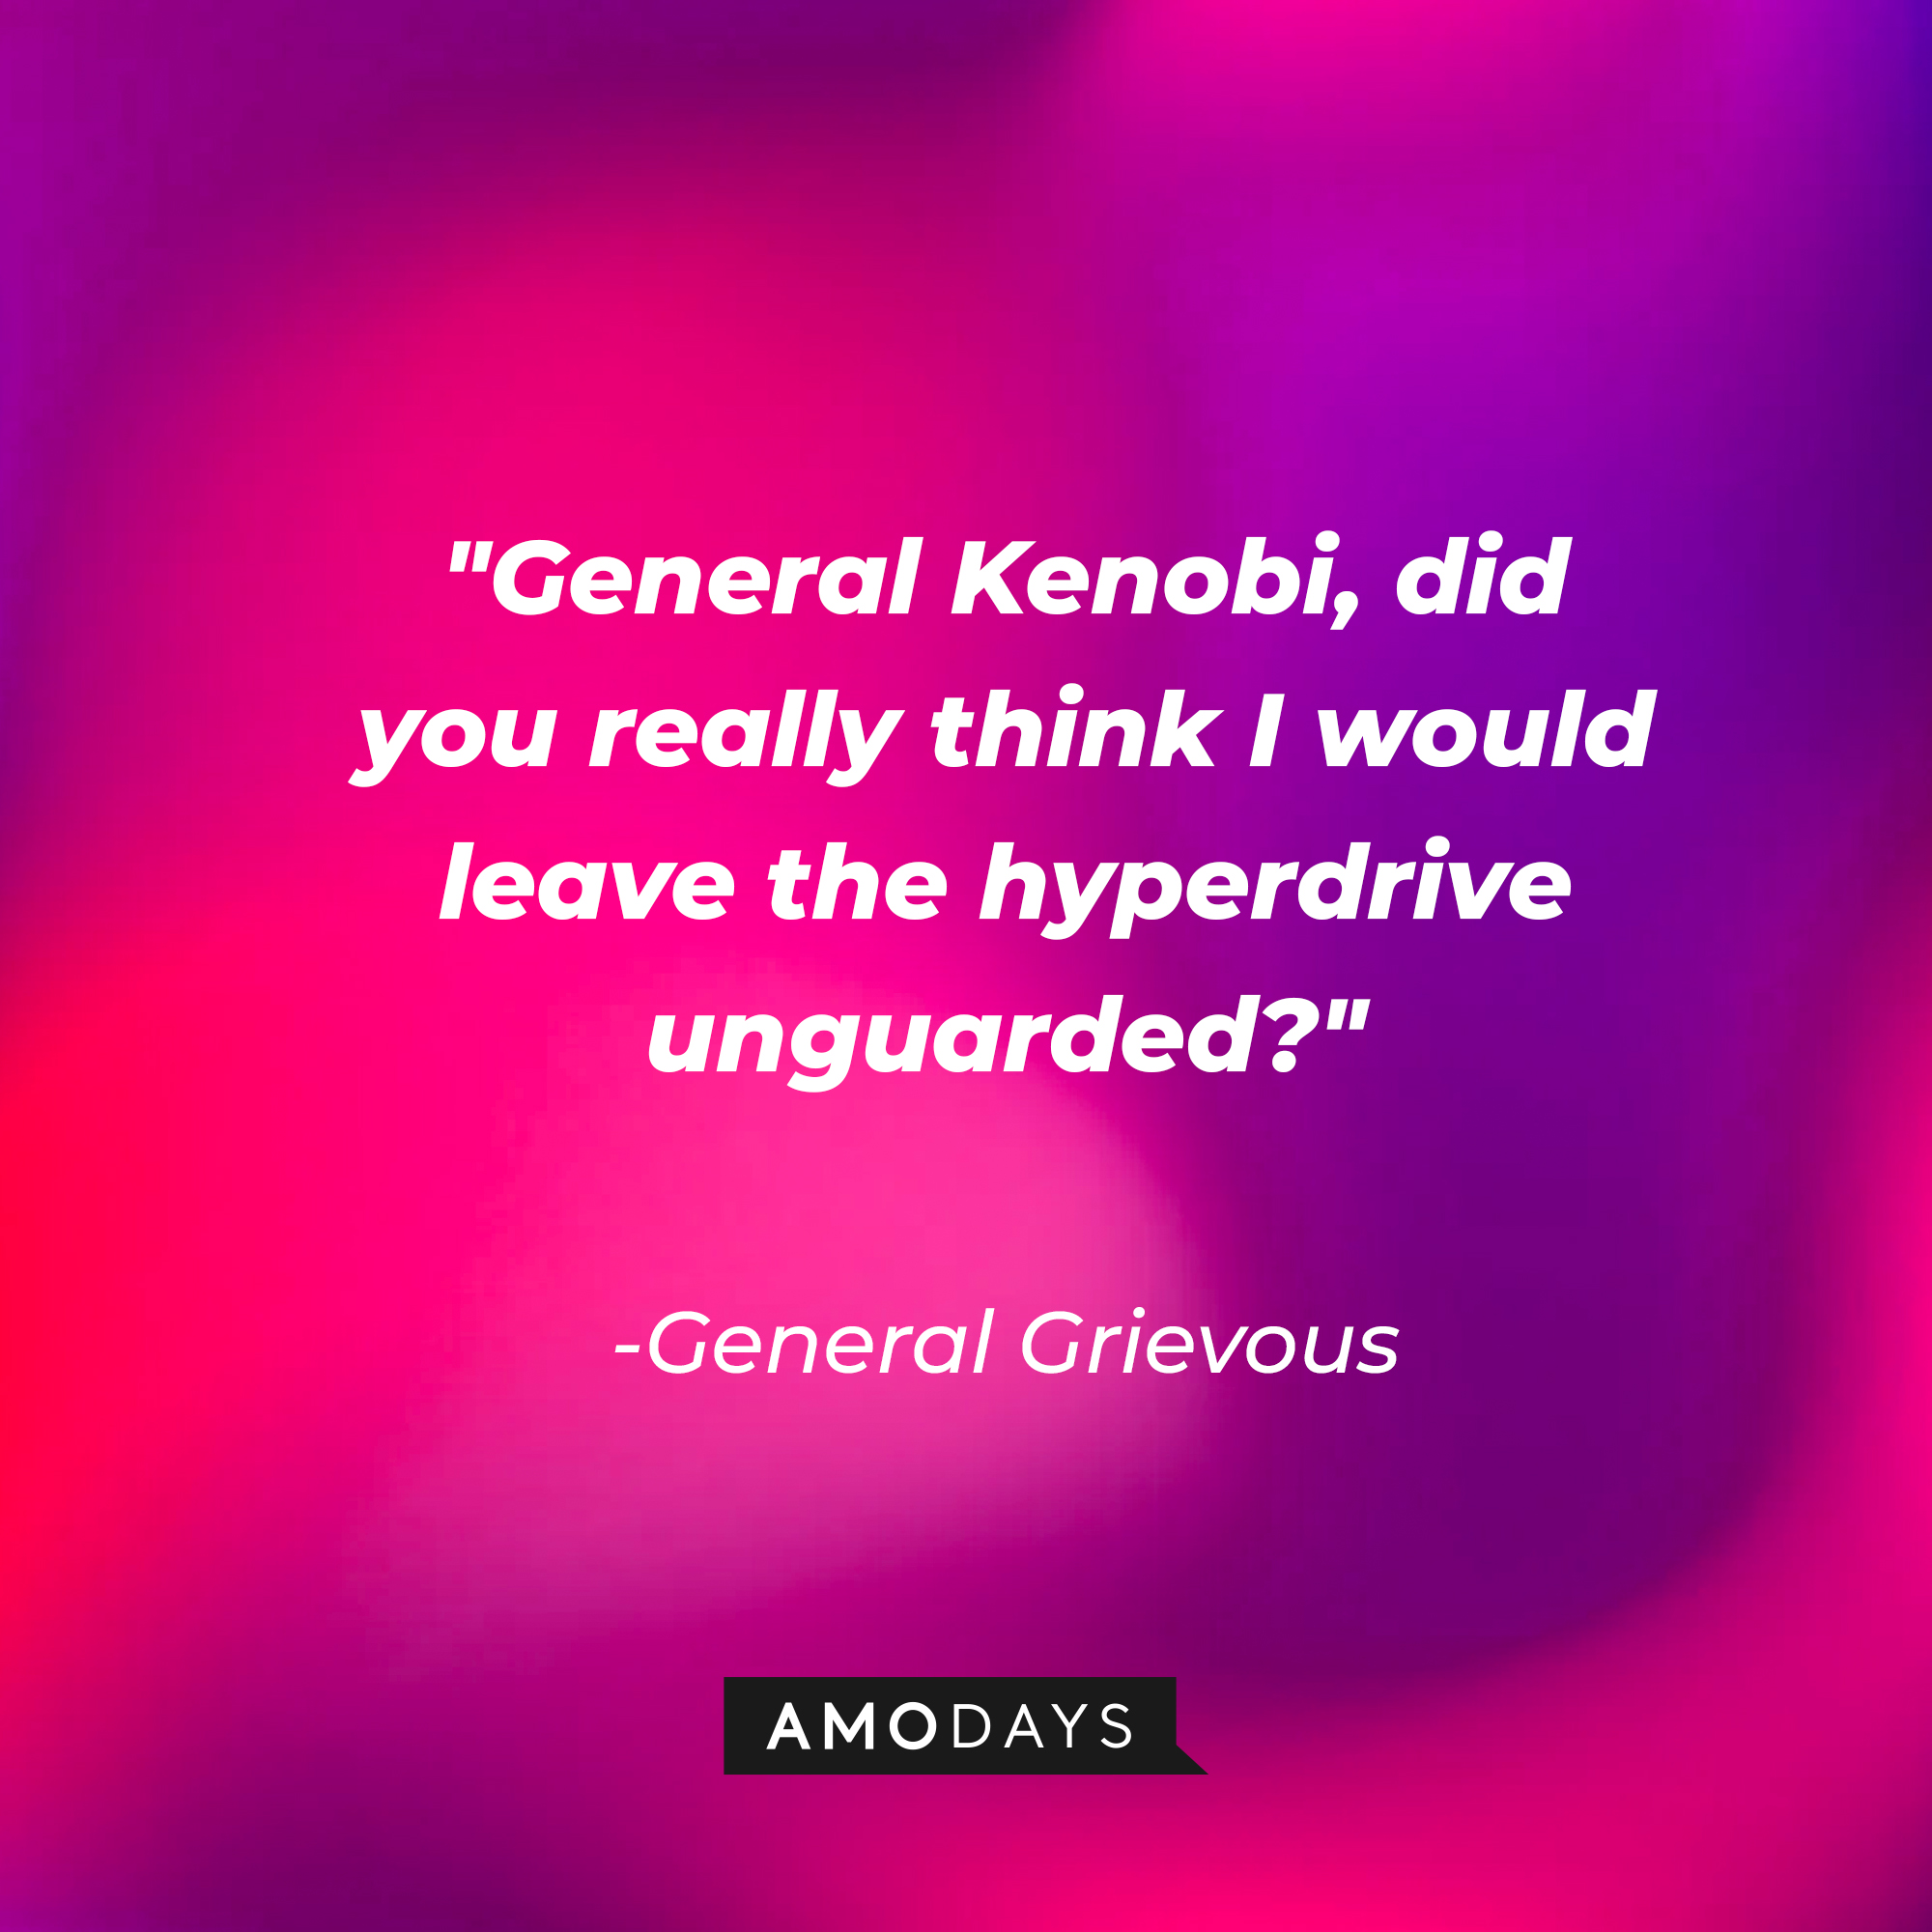 General Grievous' quote: "General Kenobi, did you really think I would leave the hyperdrive unguarded?" | Source: AmoDays